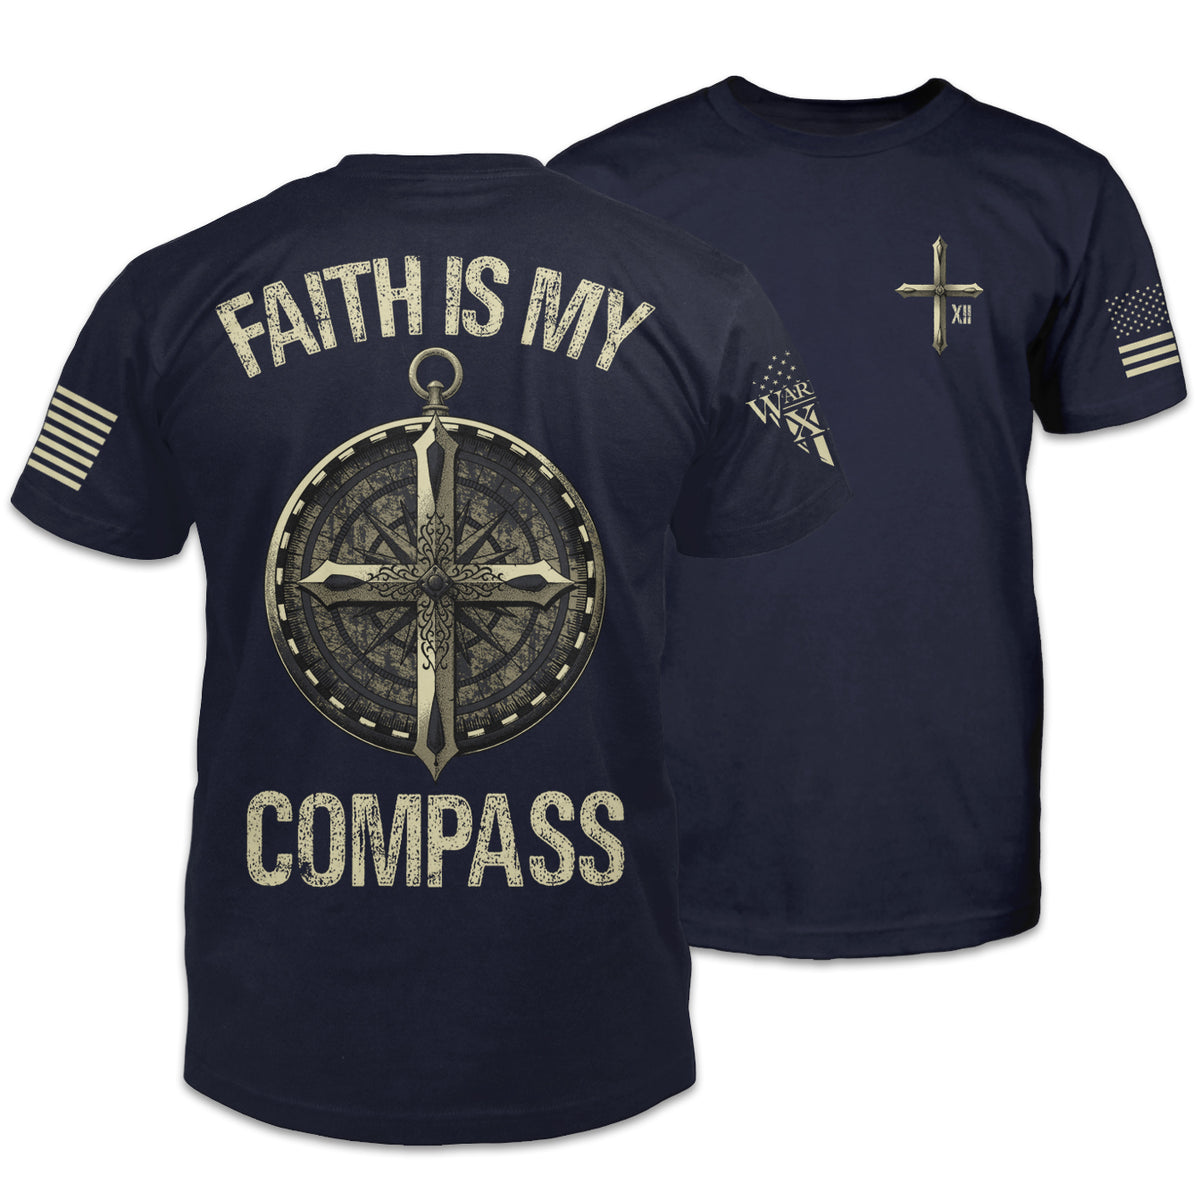 A navy blue t-shirt with an image on the back of a compass with a Christian Cross on it with the words "Faith is my Compass", and a small pocket image on the front of a cross.